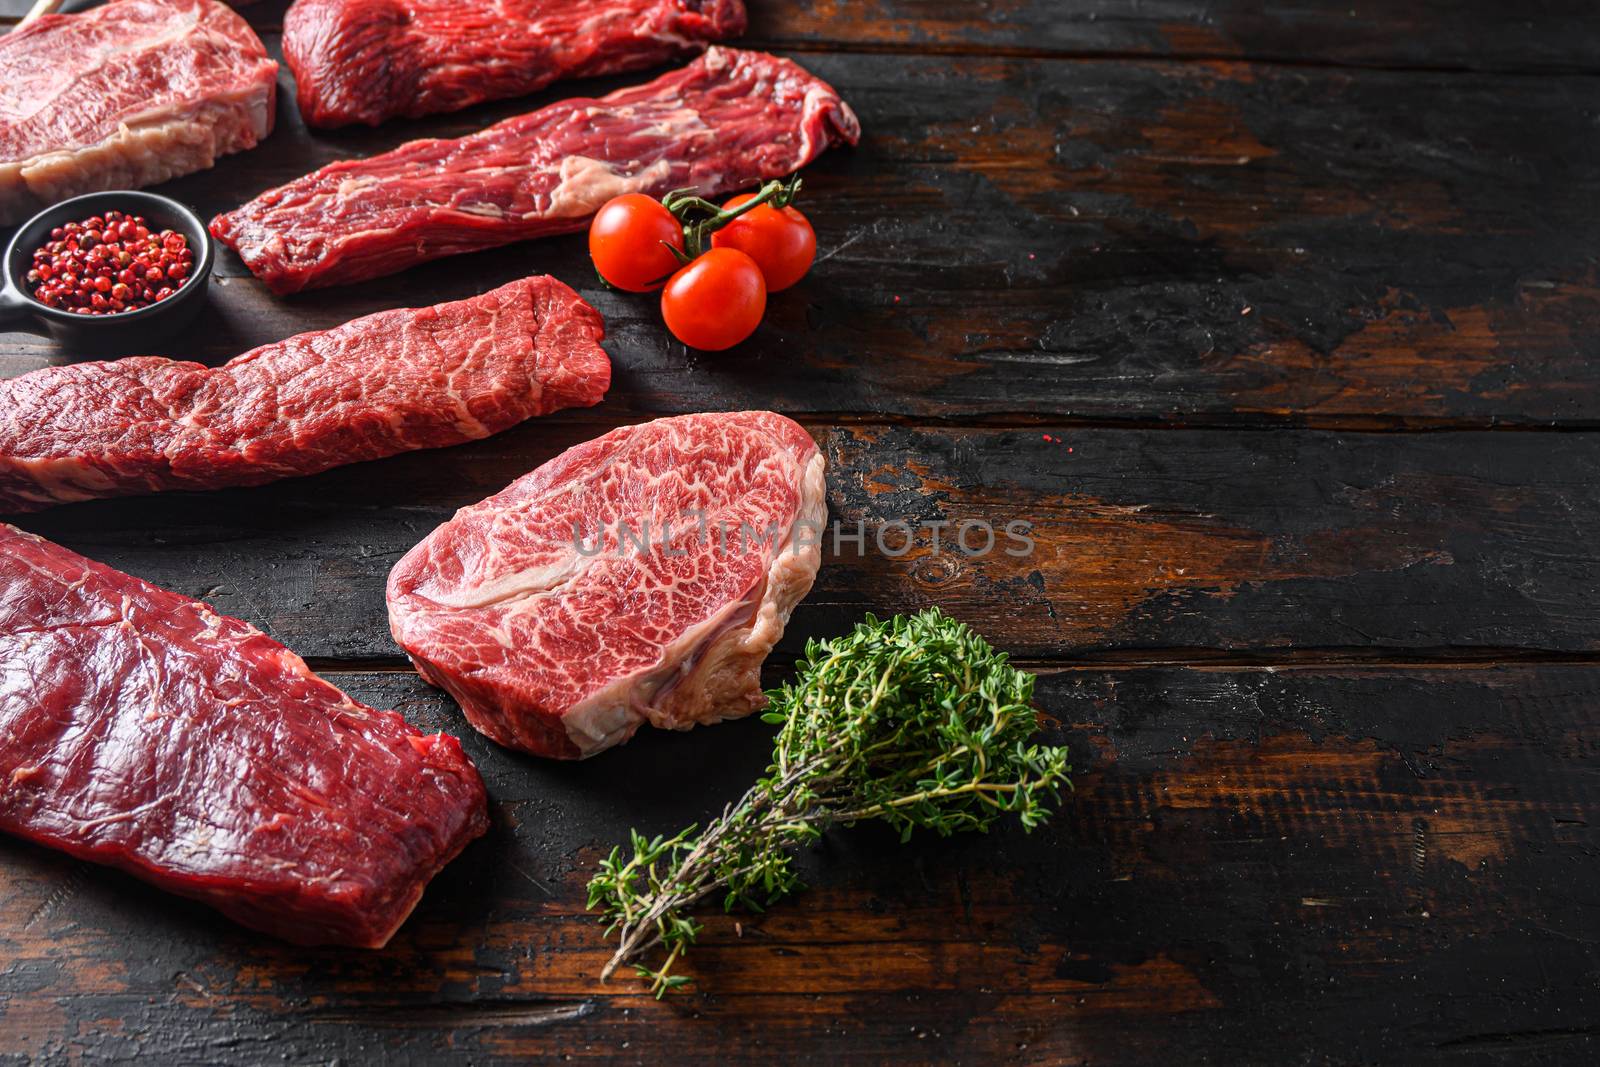 Set of fresh raw alternative beef steaks flap flank Steak, machete steak or skirt cut, Top blade or flat iron beef and tri tip, triangle roast with denver cut side view over old butcher wood table close up space for text.